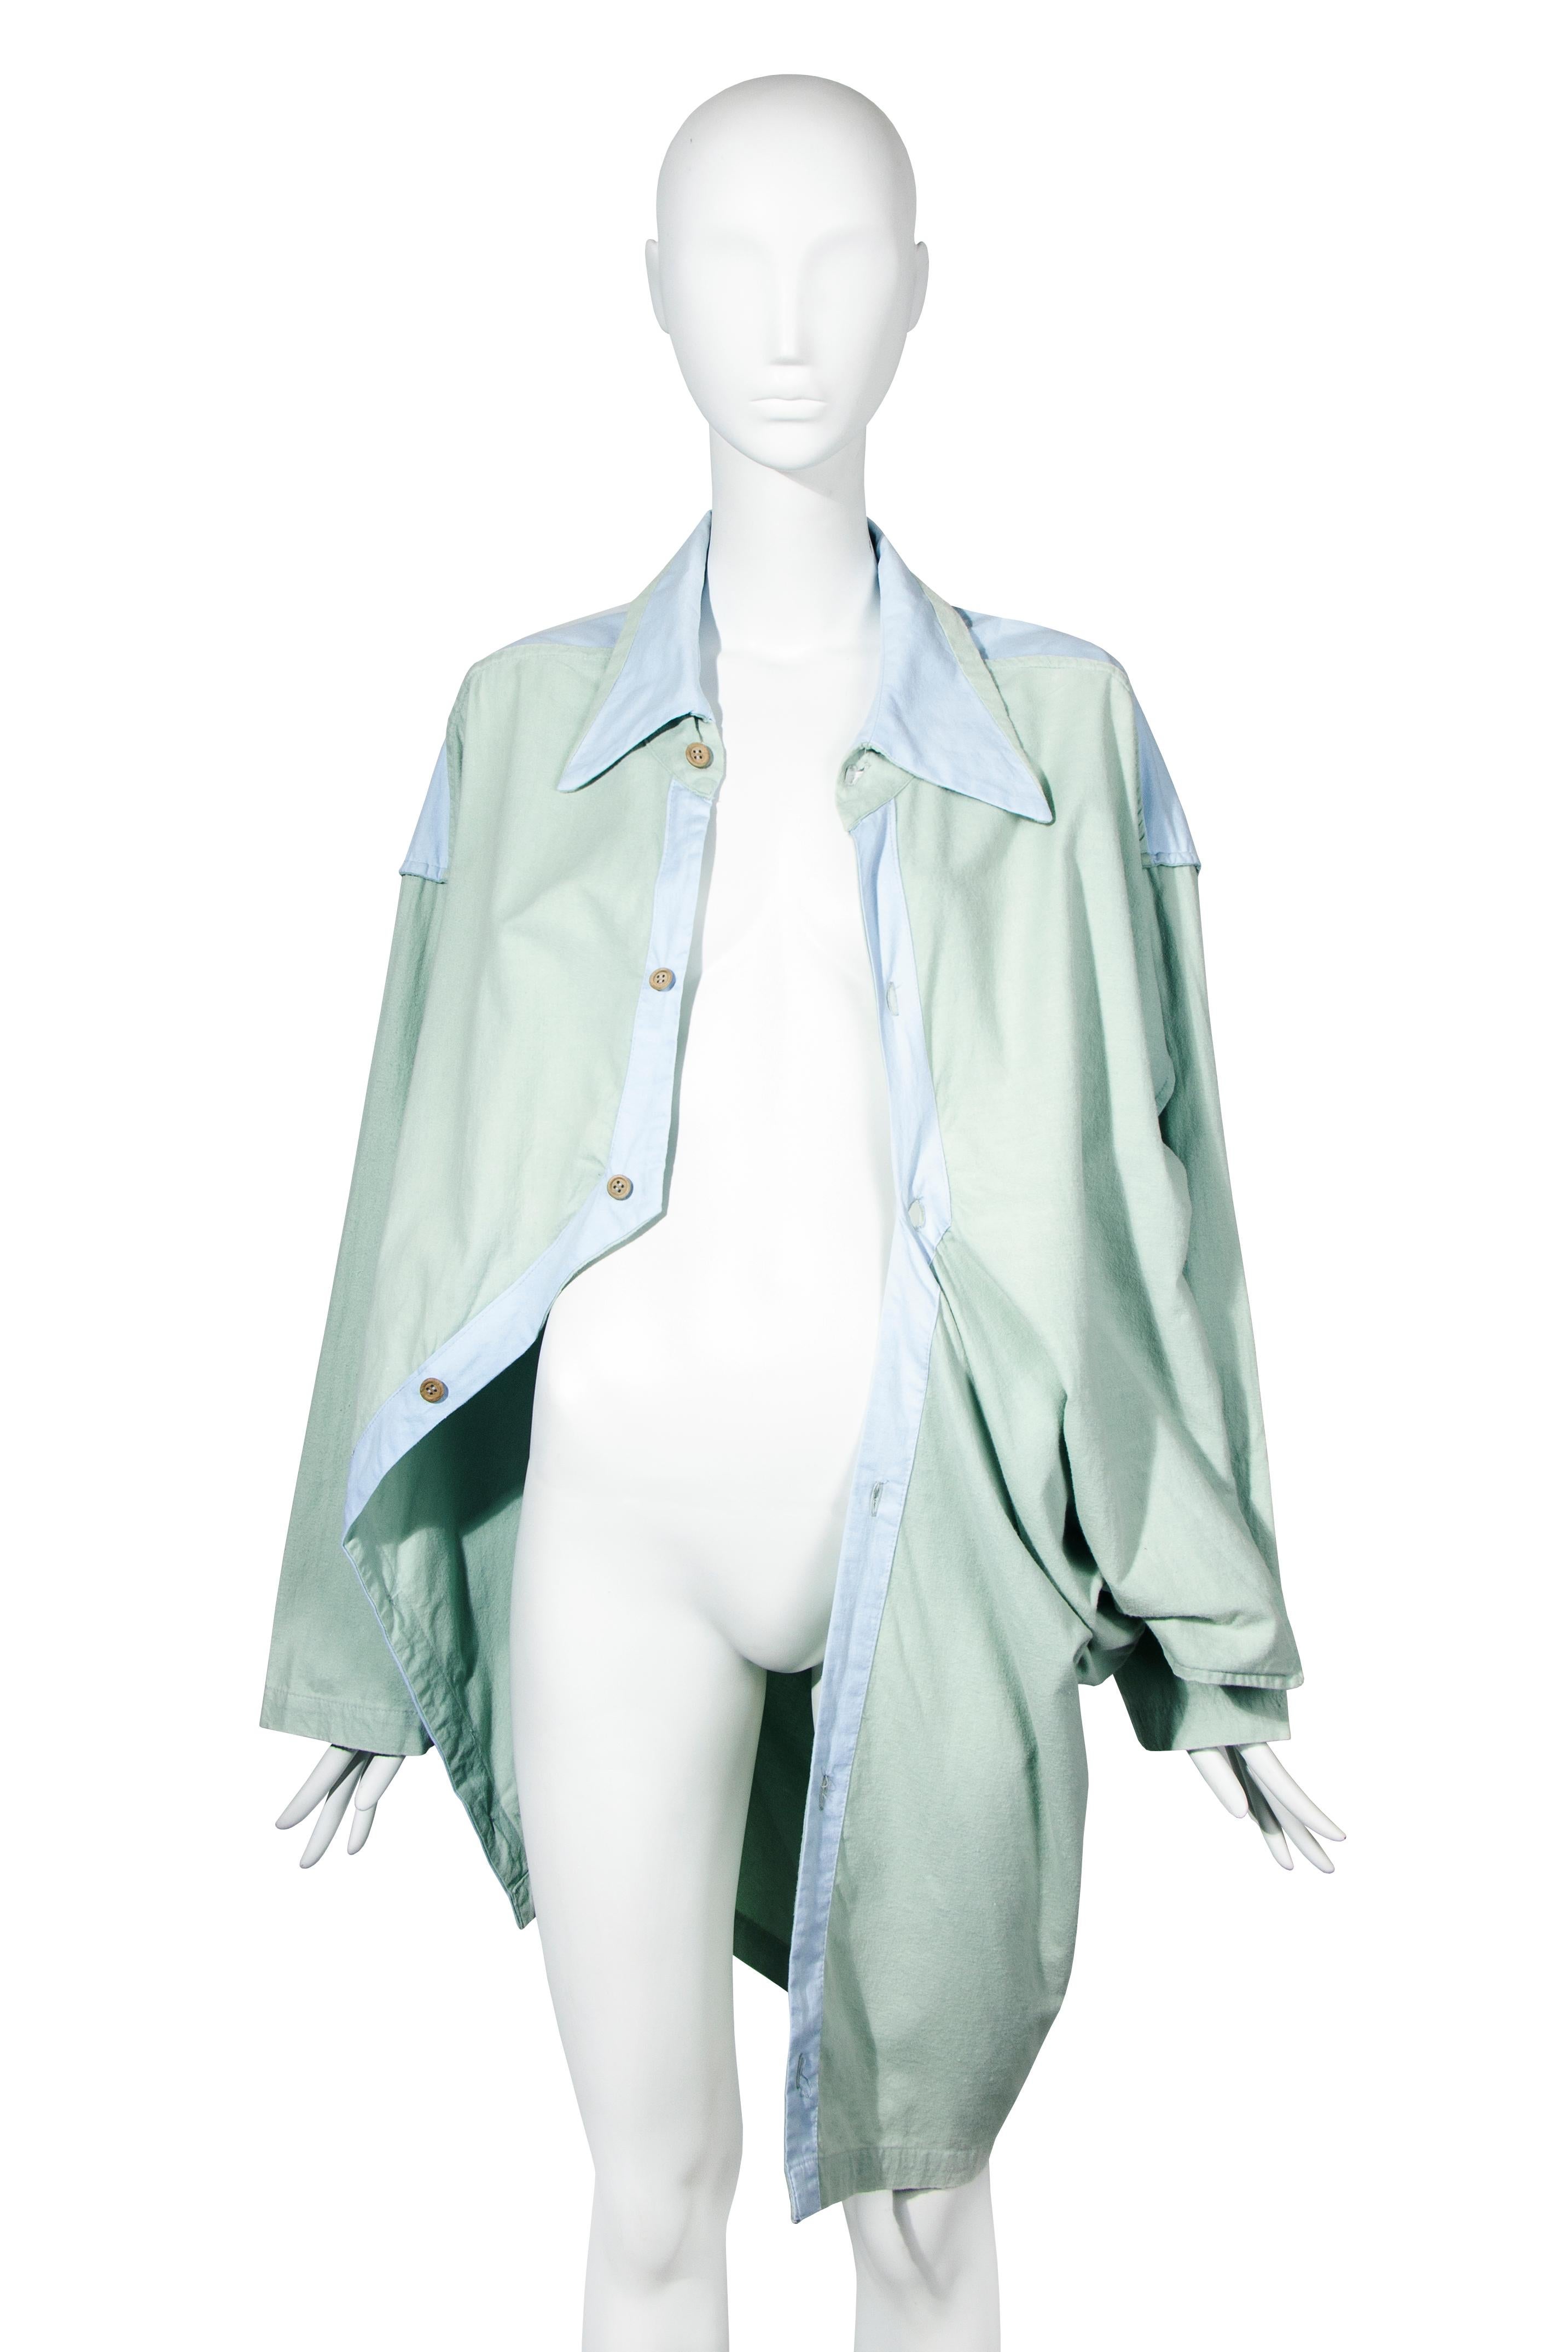 John Galliano 'The Ludic Games' spencer jacket & oversized shirt pair, fw 1985 For Sale 9